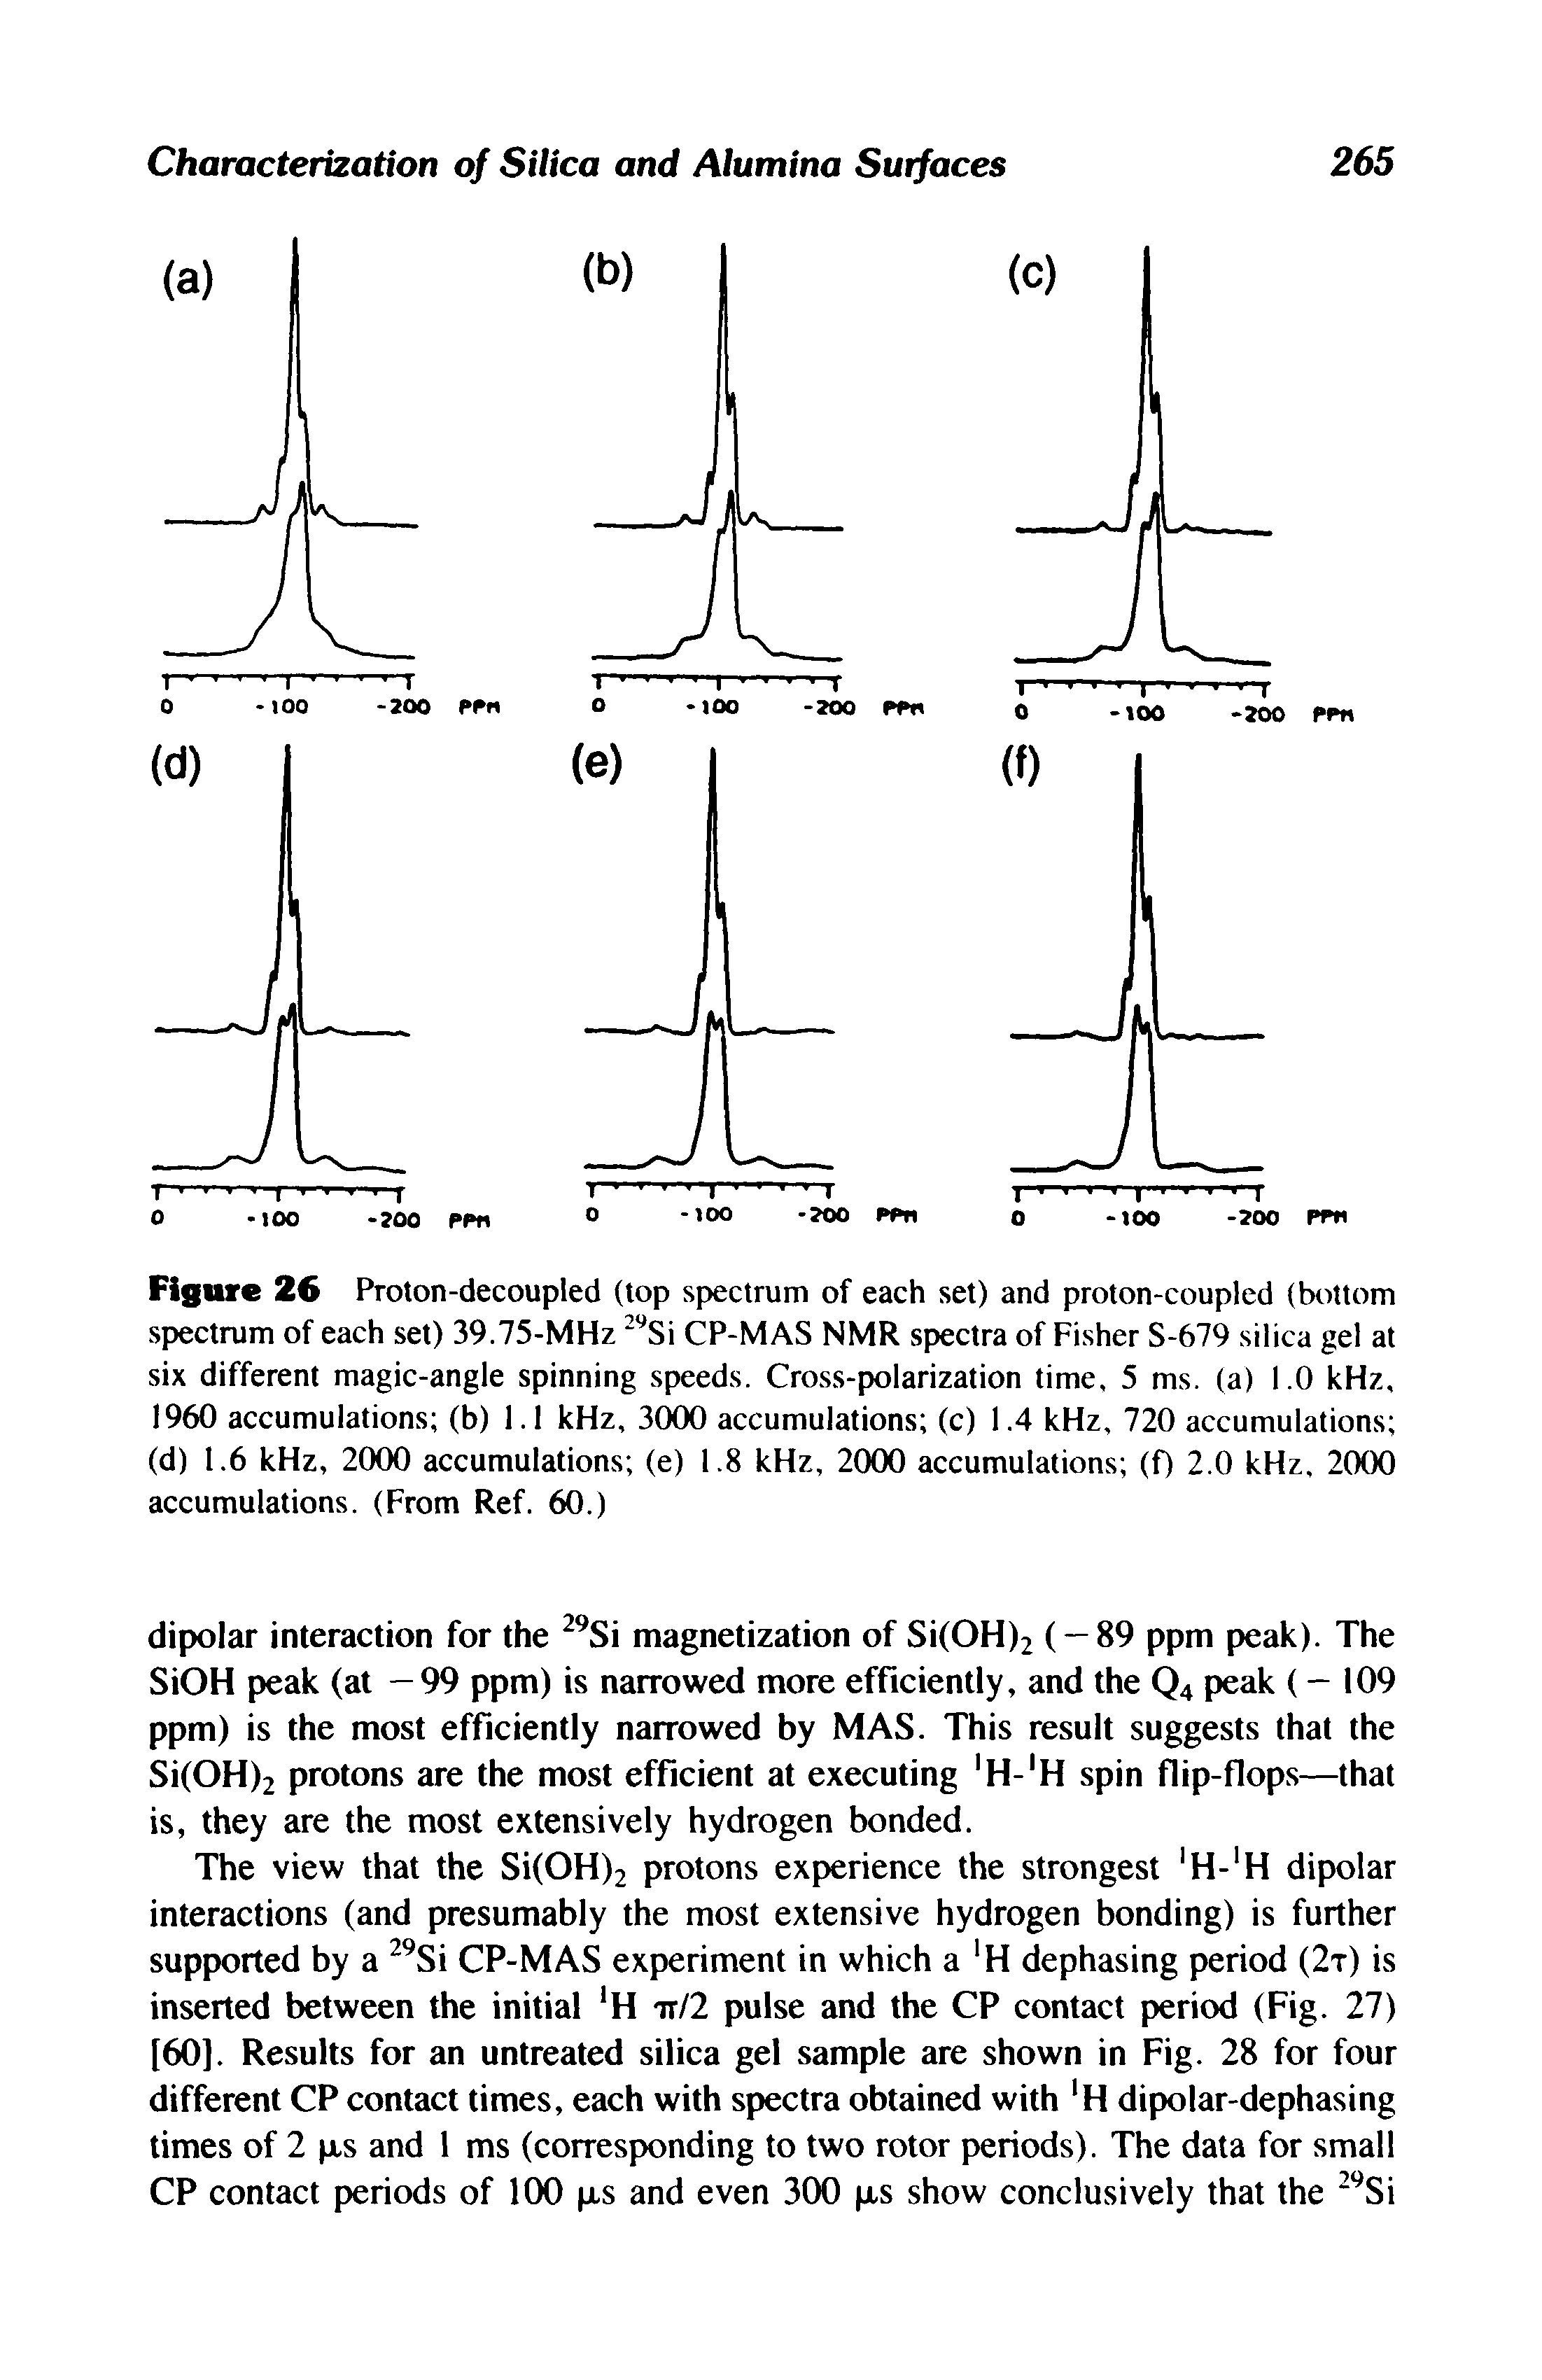 Figure 26 Proton-decoupled (top spectrum of each set) and proton-coupled (bottom spectrum of each set) 39.75-MHz Si CP-MAS NMR spectra of Fisher S-679 silica gel at six different magic-angle spinning speeds. Cross-polarization time, 5 ms. (a) 1.0 kHz, 1960 accumulations (b) 1.1 kHz, 3000 accumulations (c) 1.4 kHz, 720 accumulations (d) 1.6 kHz, 2000 accumulations (e) 1.8 kHz, 20(X) accumulations (f) 2.0 kHz, 2(XX) accumulations. (From Ref. 60.)...